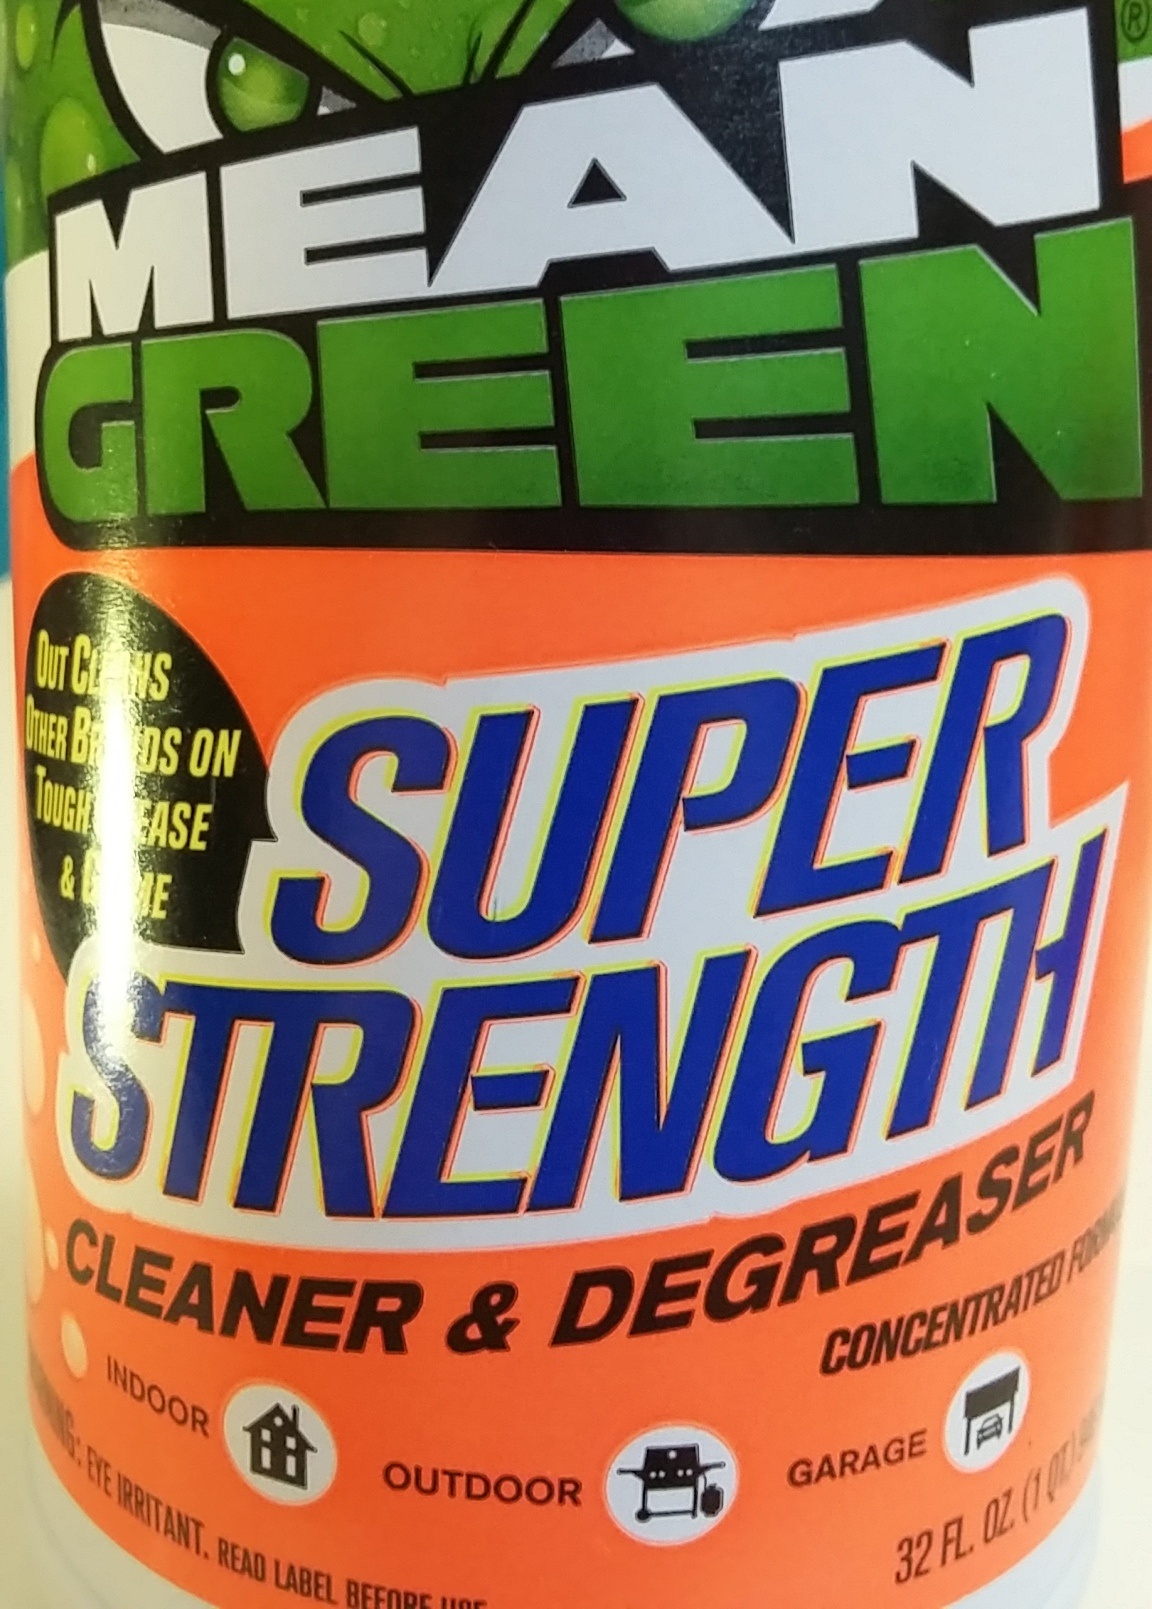 Mean Green, for all your cleaning needs